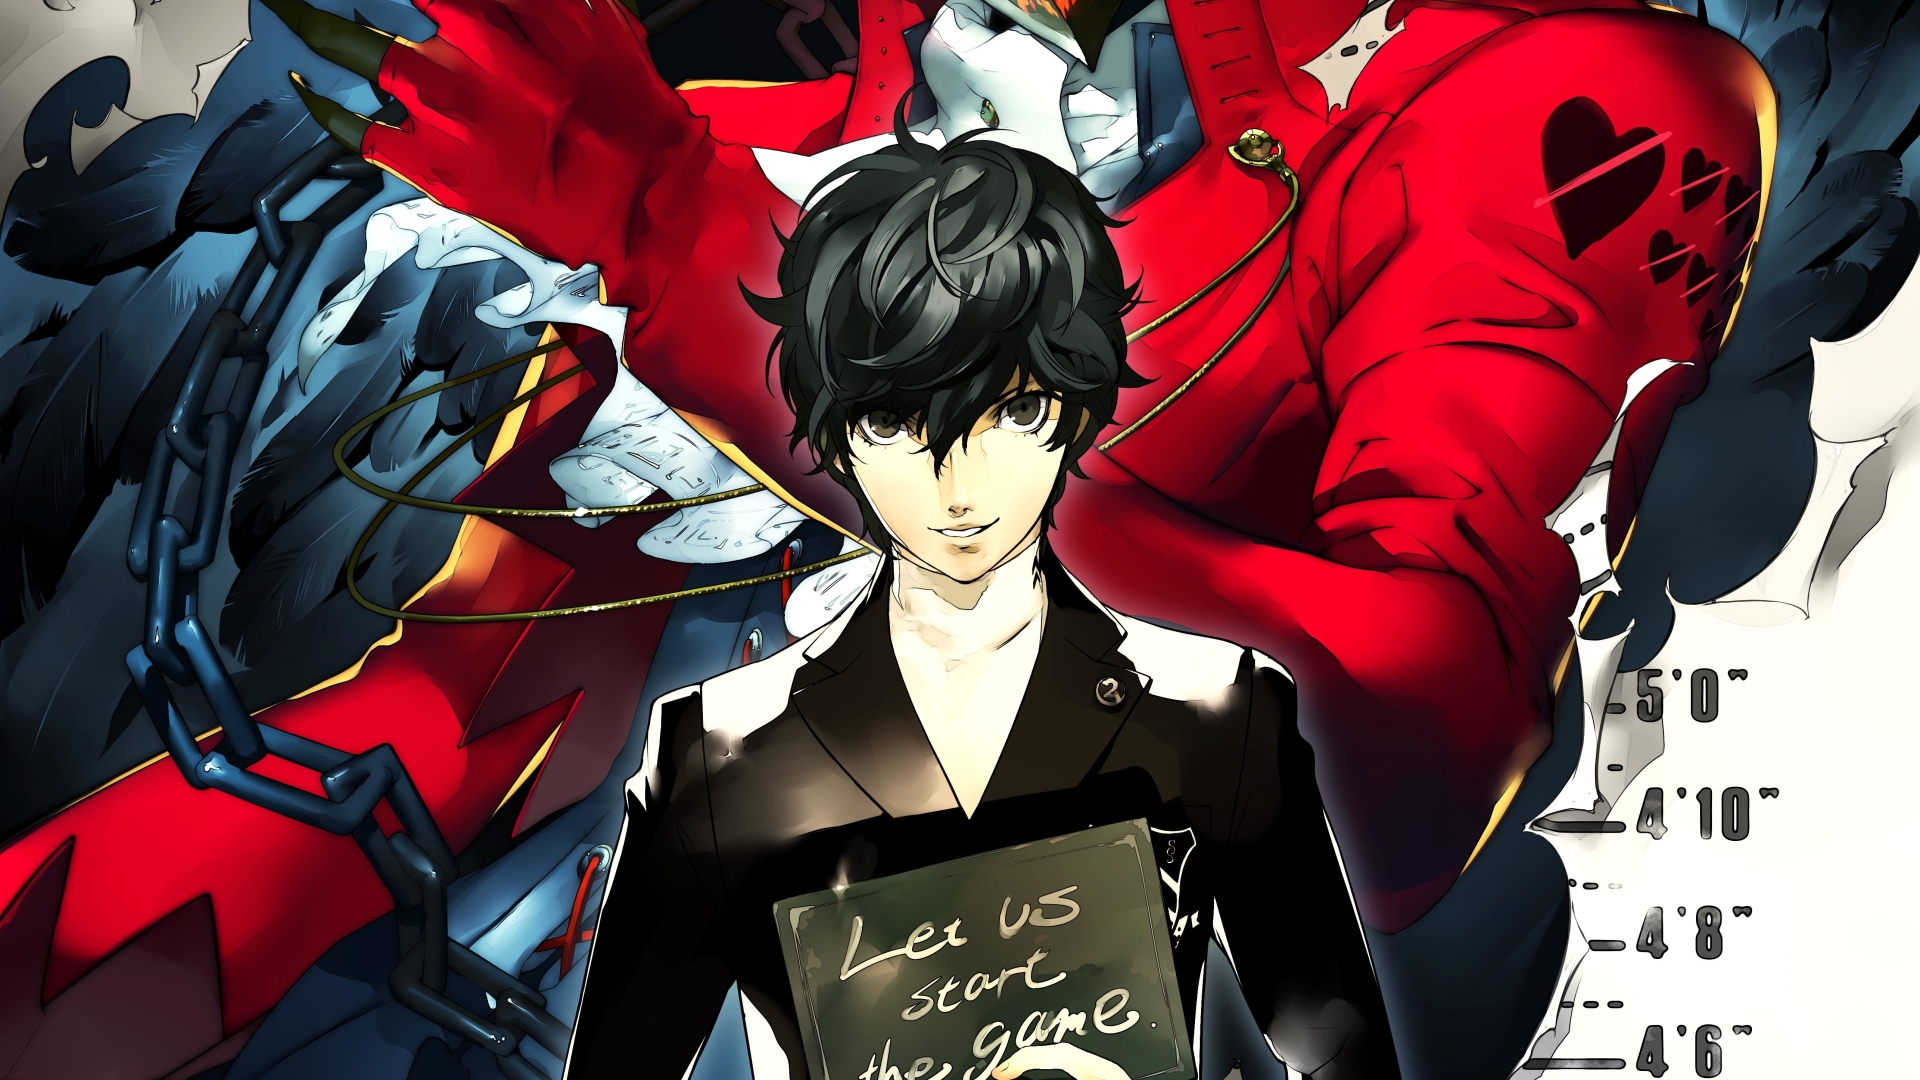 Persona 5 Pc Wallpaper 4k Spider Man - IMAGESEE